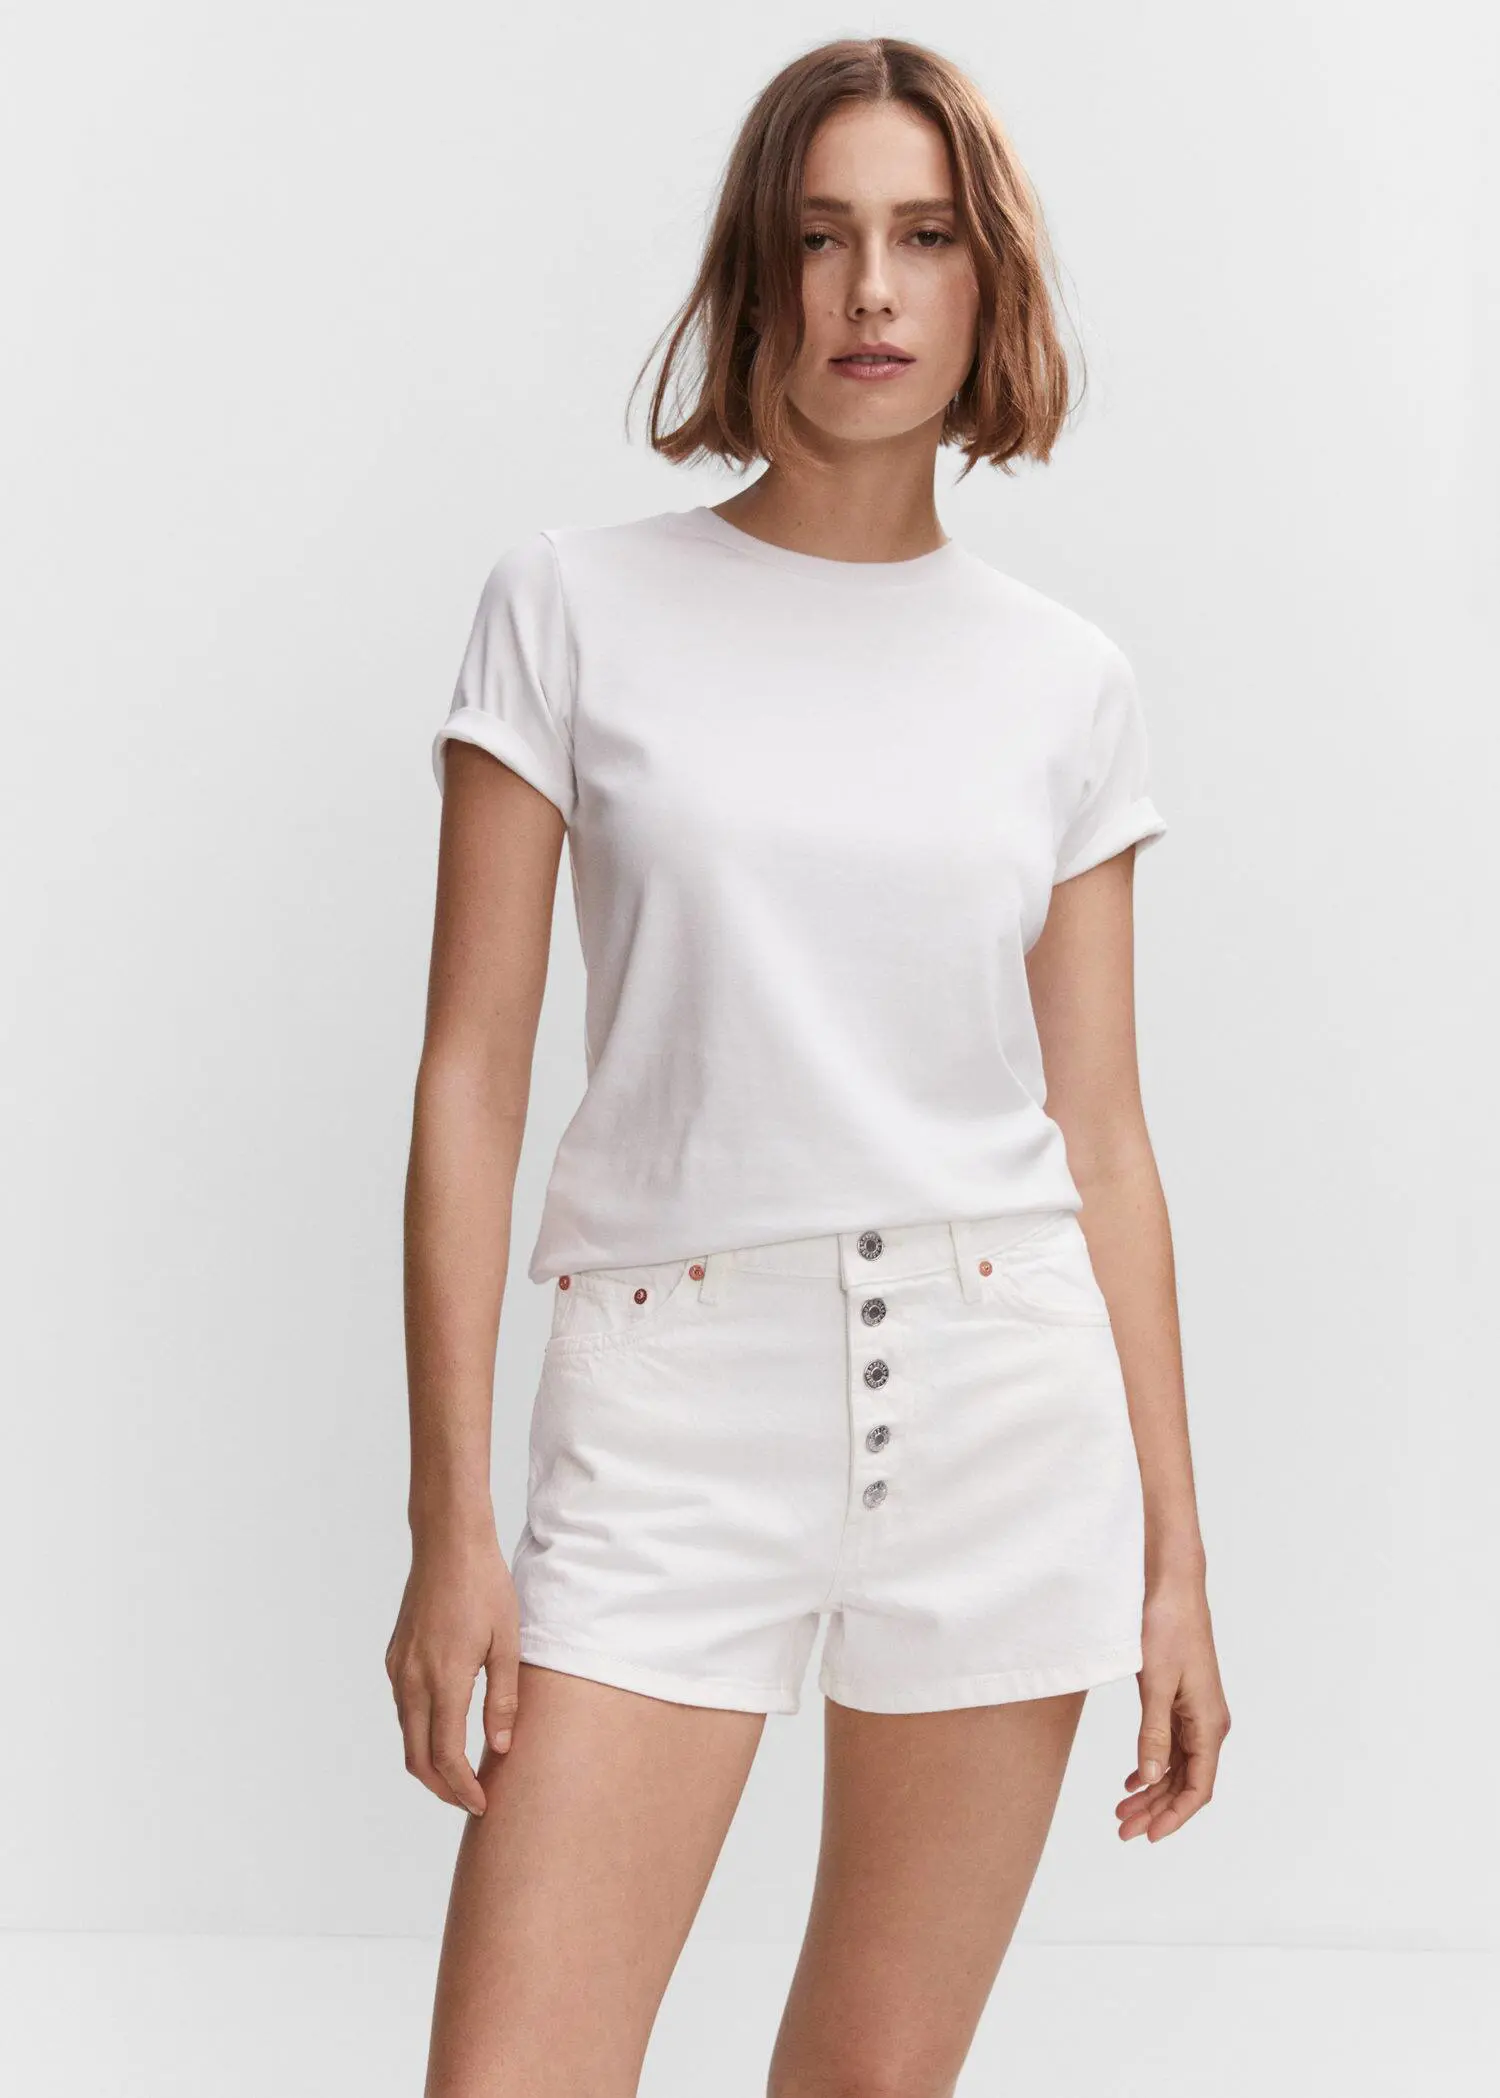 Mango Denim shorts with buttons. a woman wearing white shorts and a white t-shirt. 